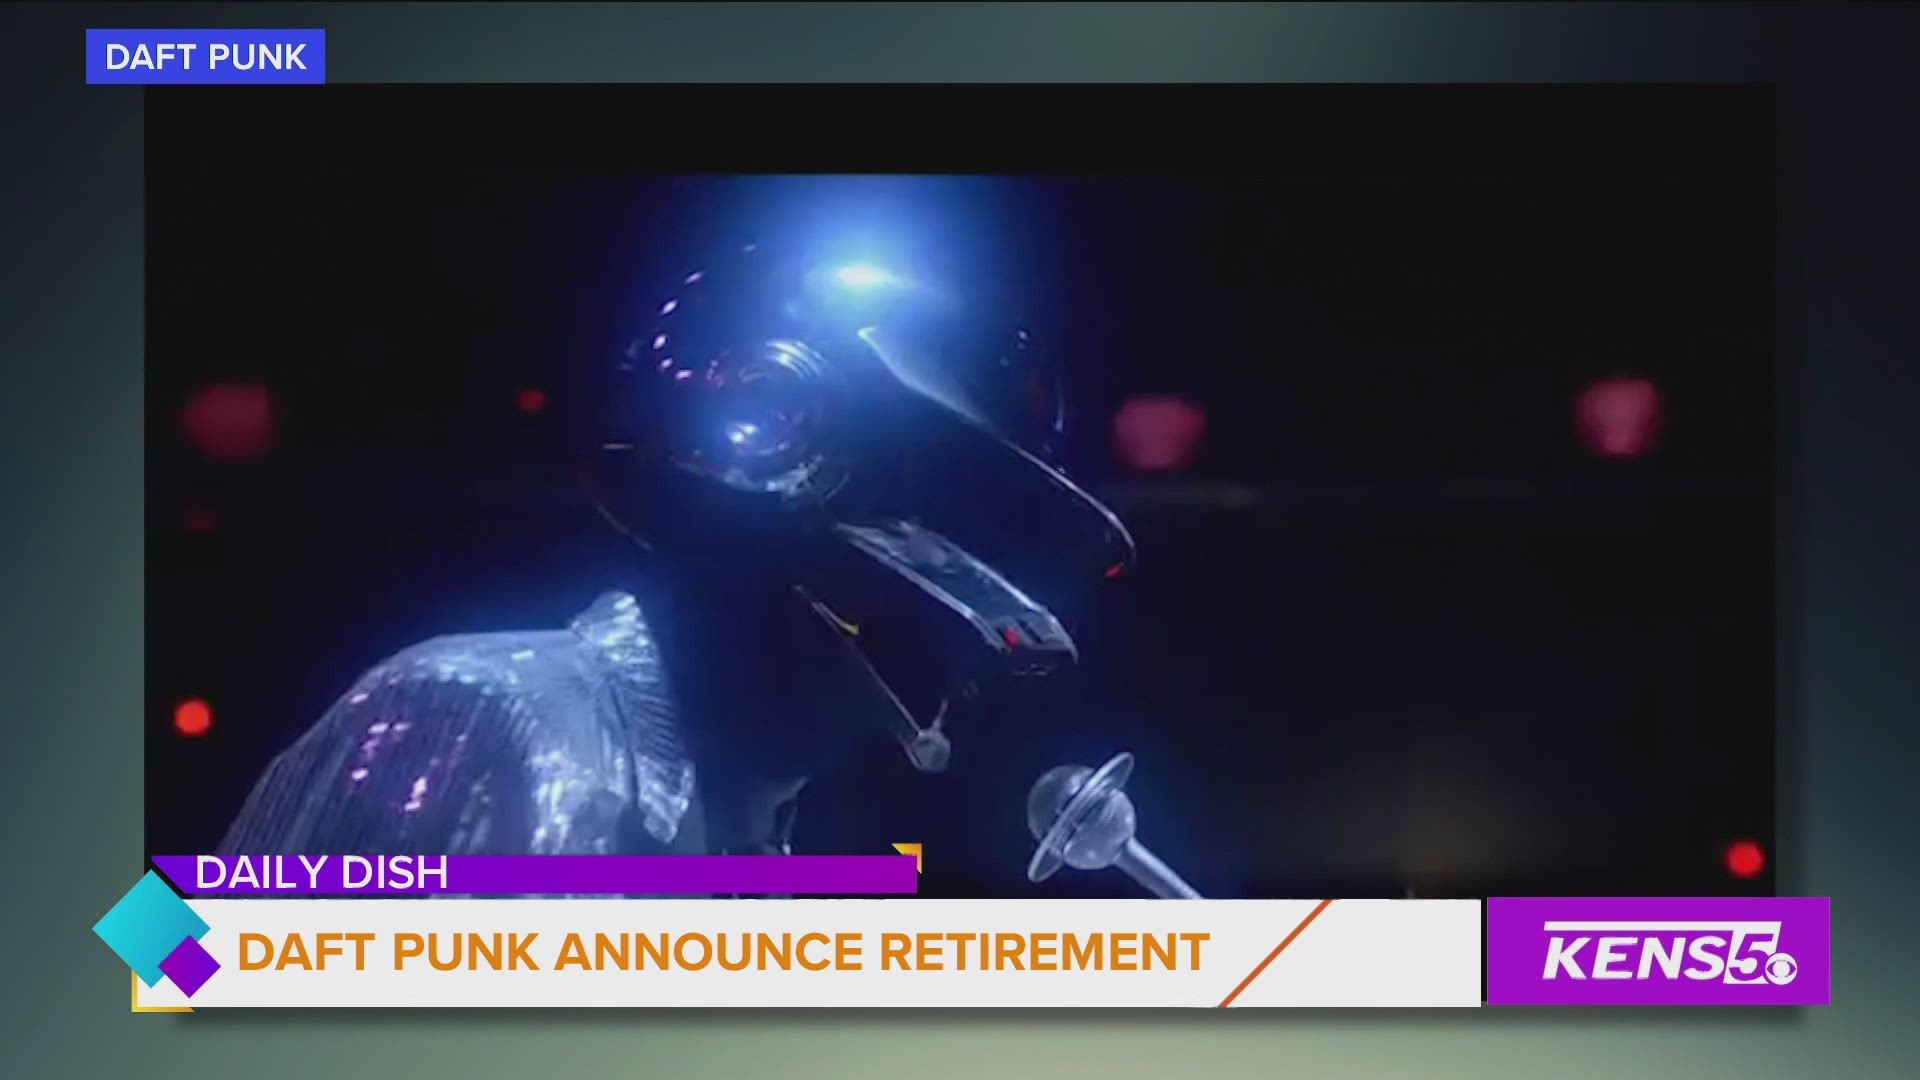 Daft Punk announces their split online. That news and more in the Daily Dish.